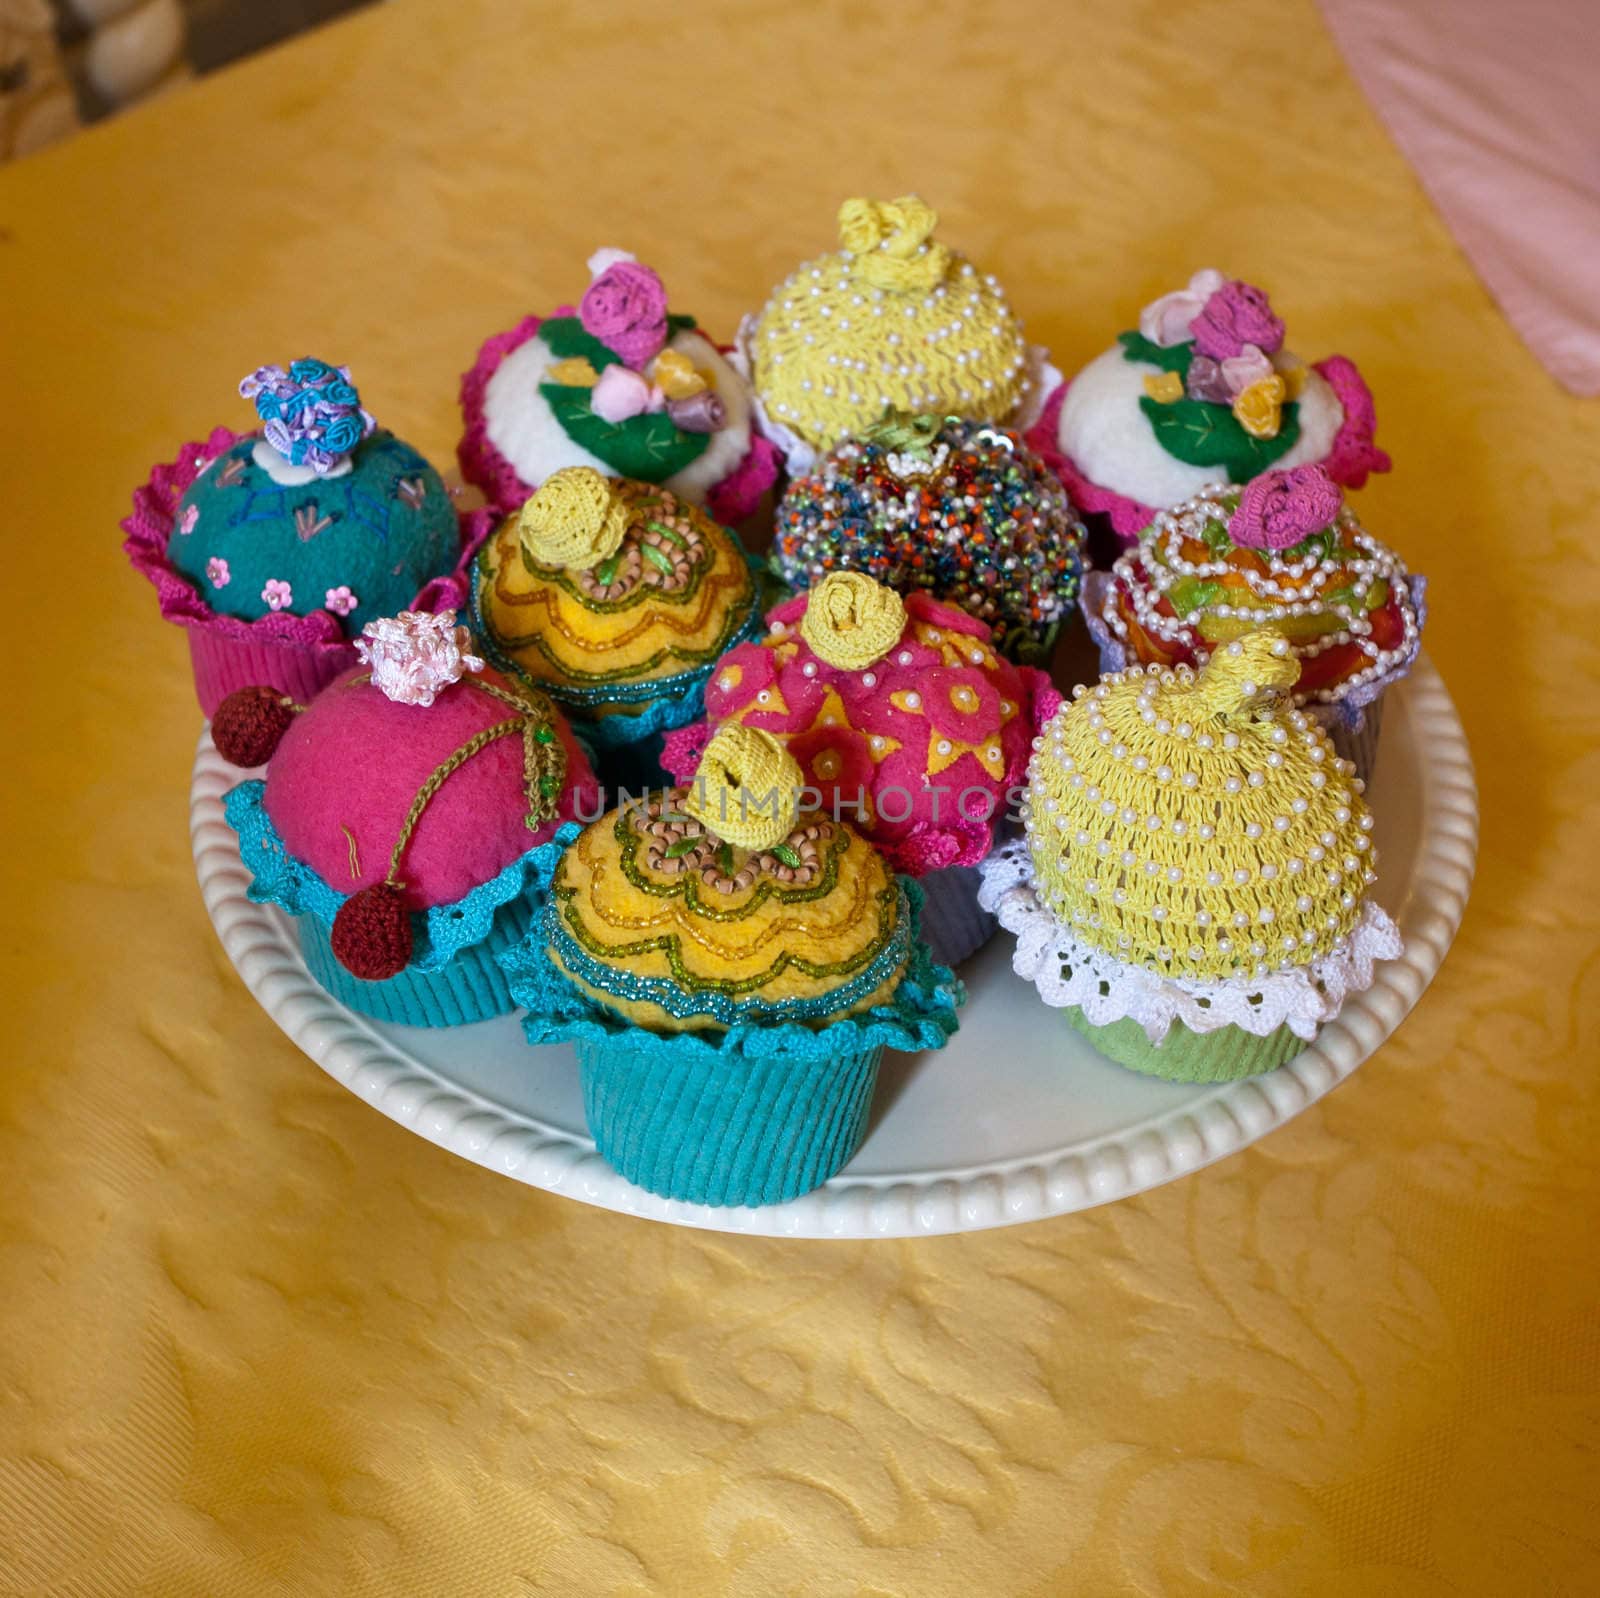 Knitted cupcakes by steheap